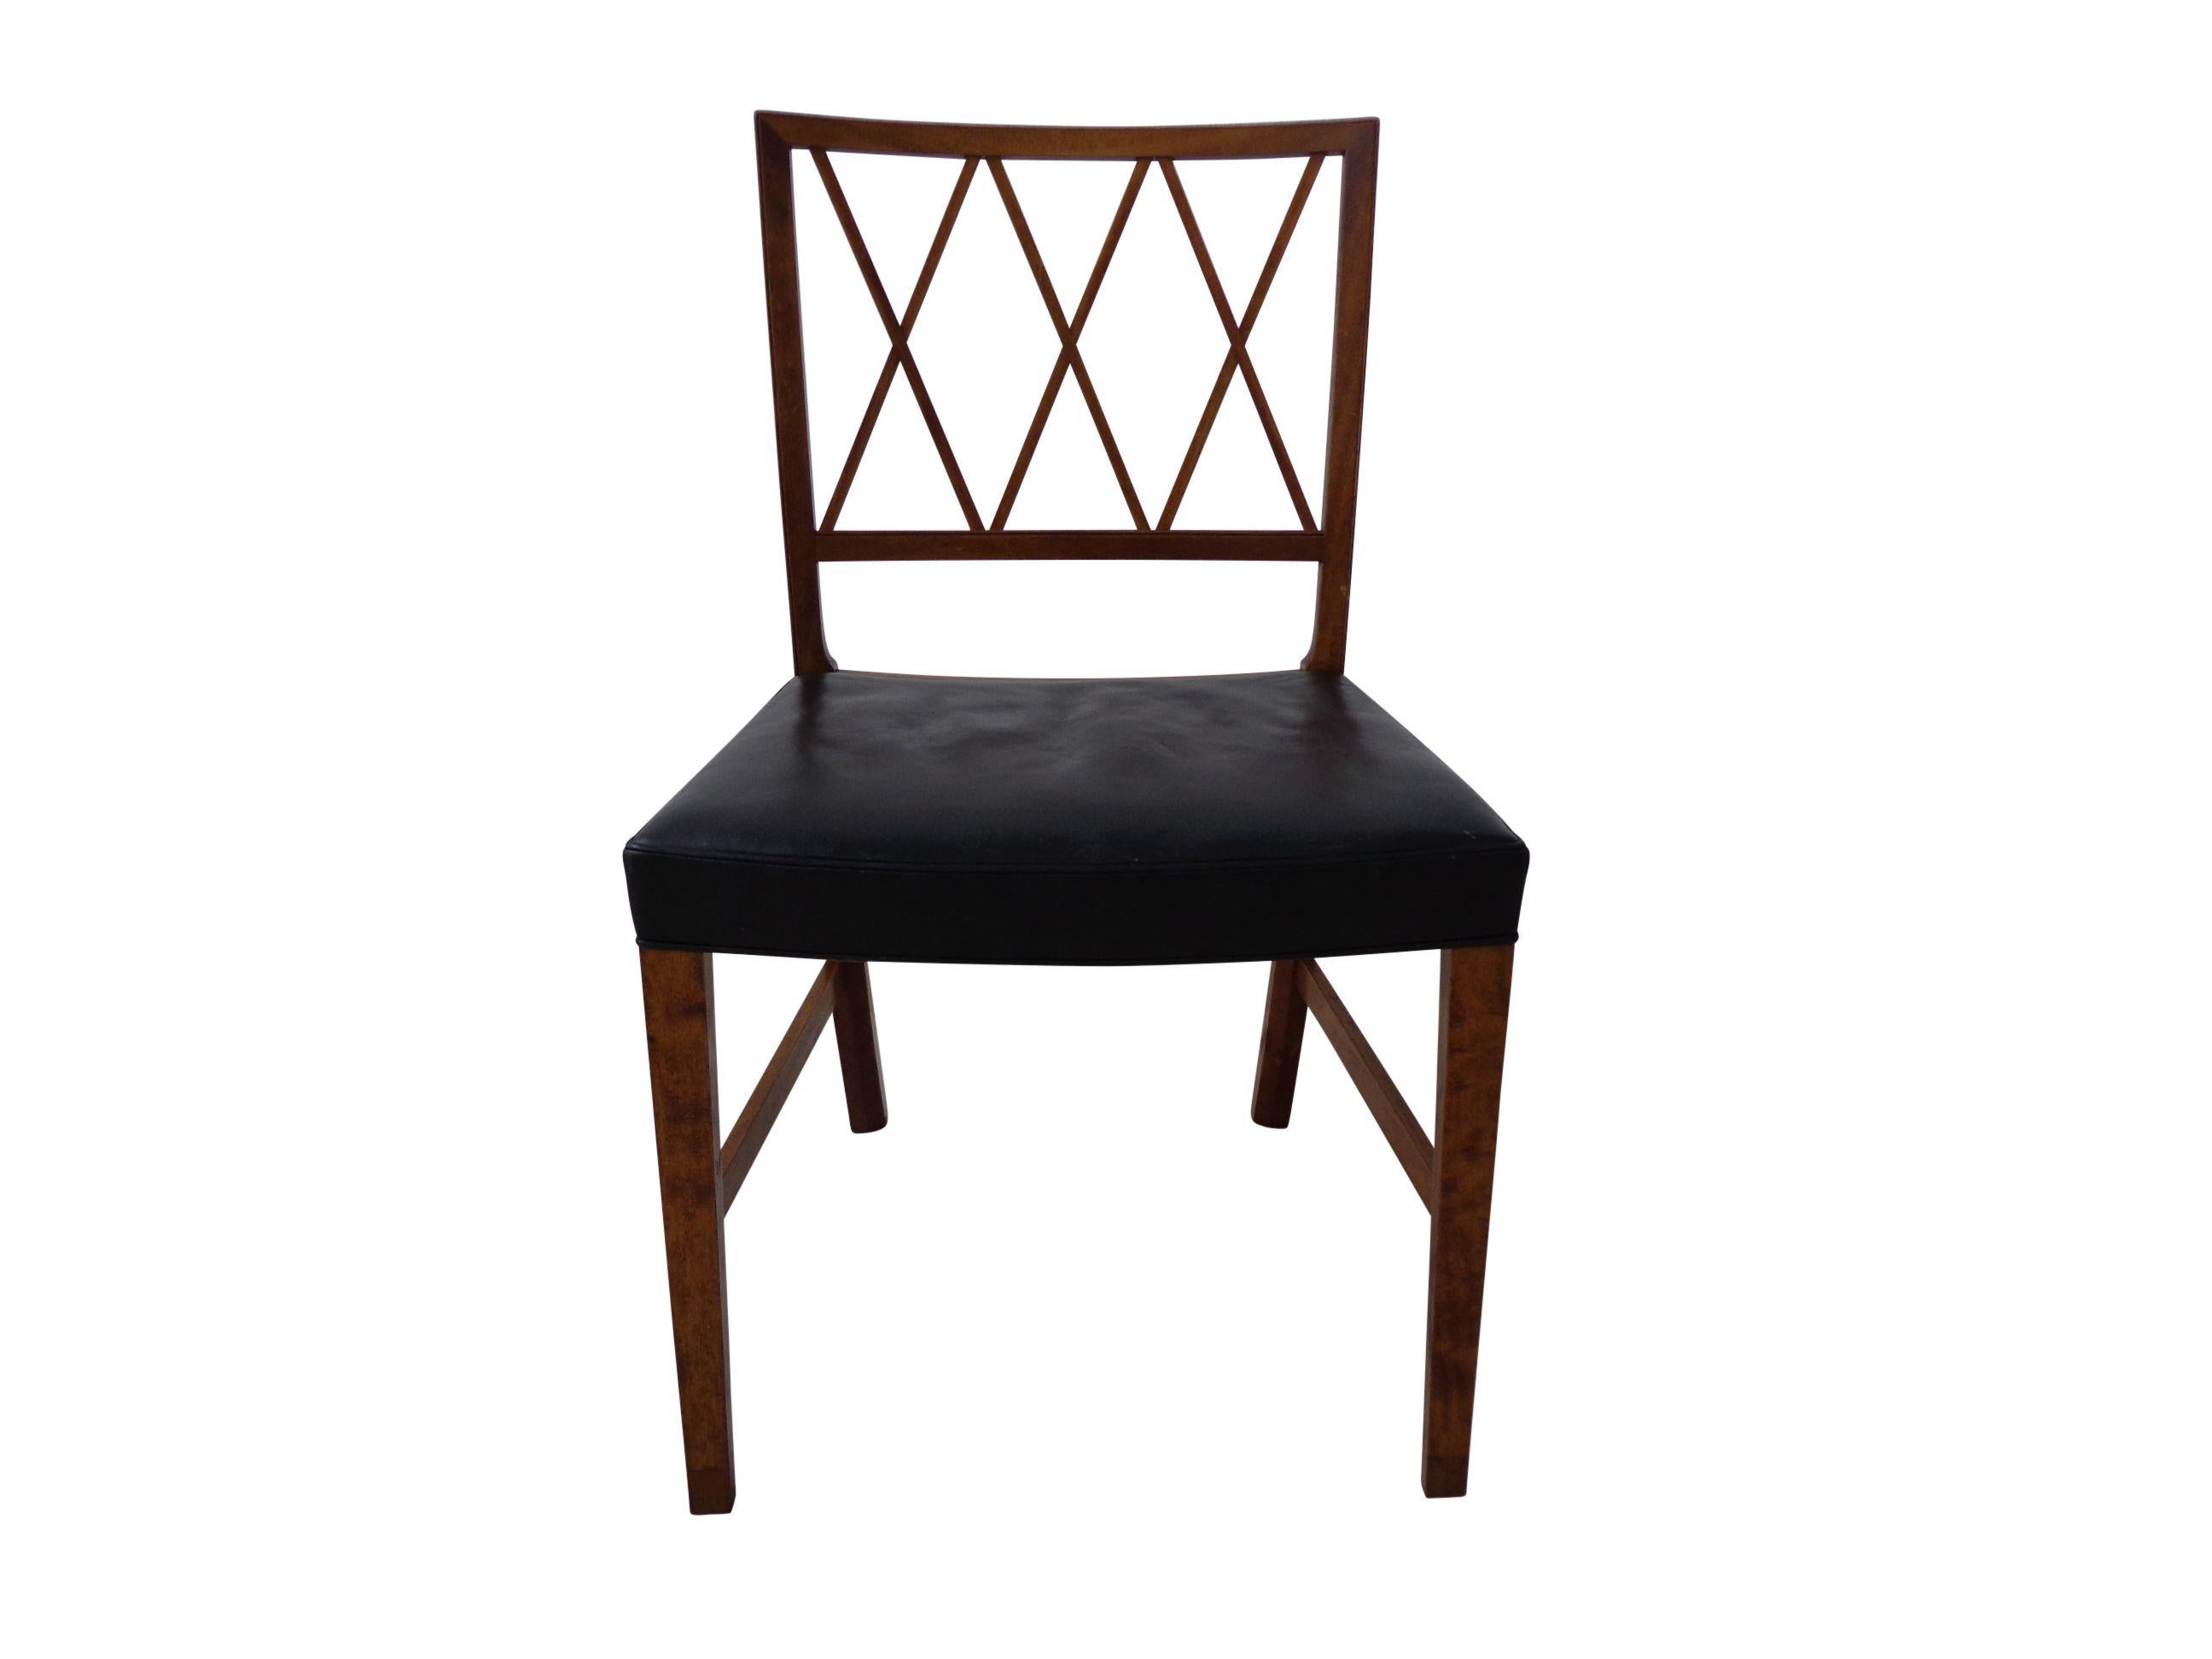 Ole Wanscher Dining Chairs by Cabinetmaker A.J Iversen in Denmark 1940s For Sale 2